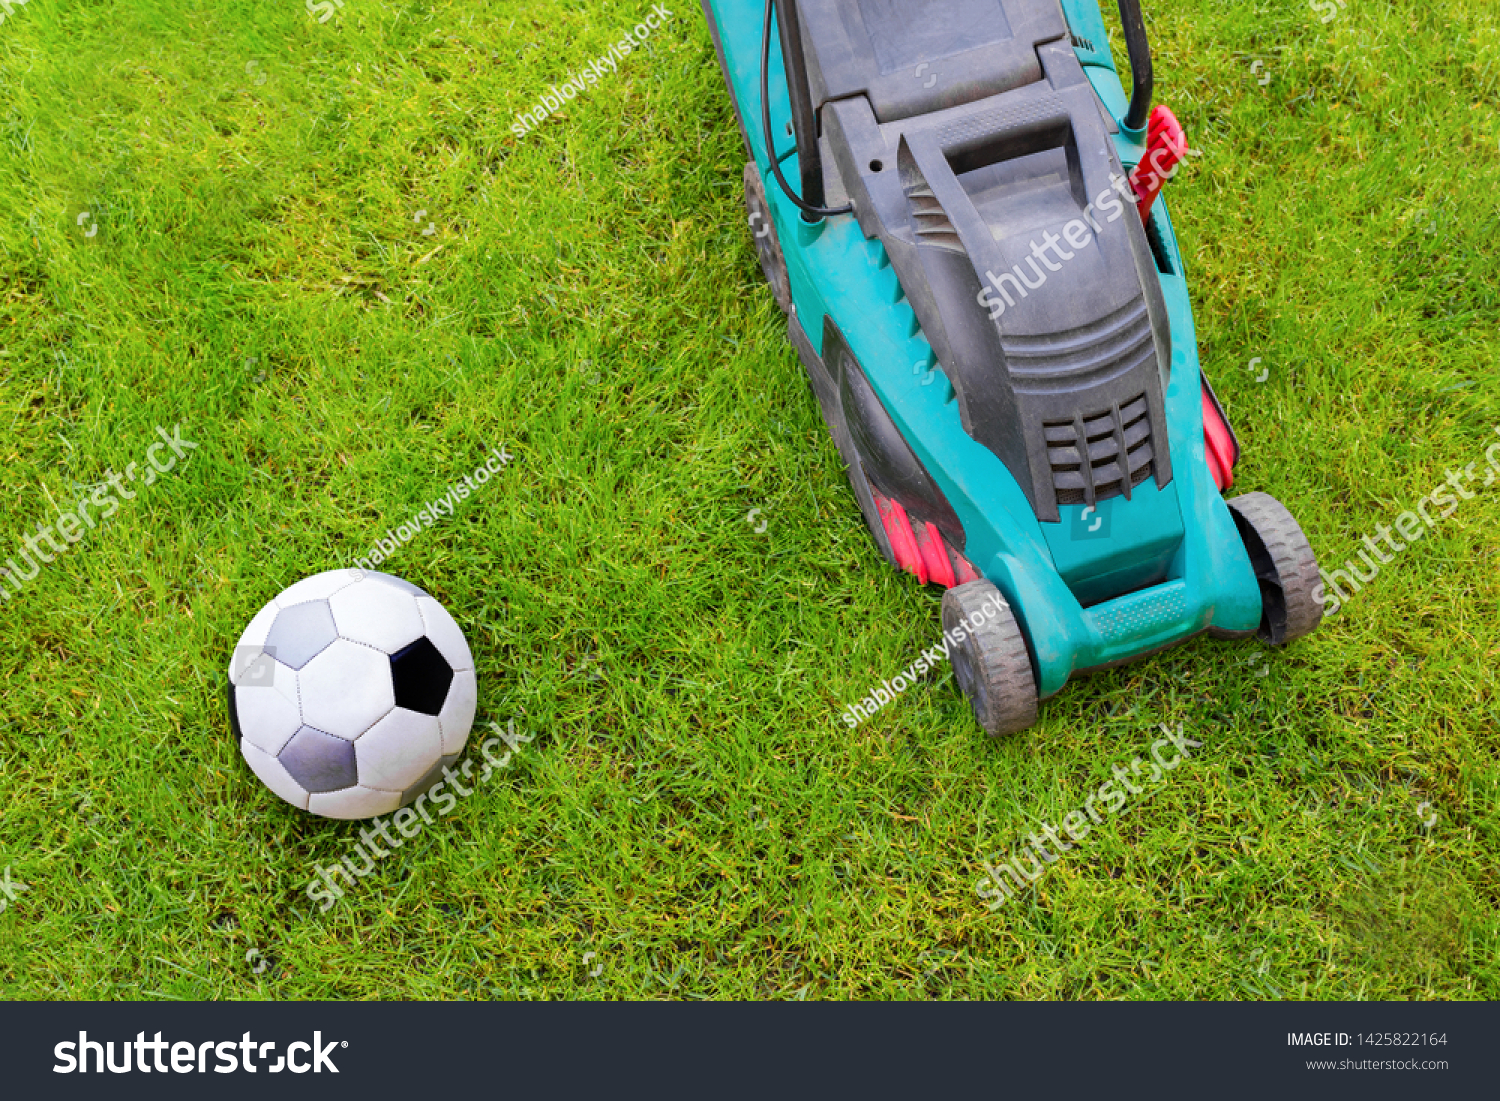 lawn mower for balls